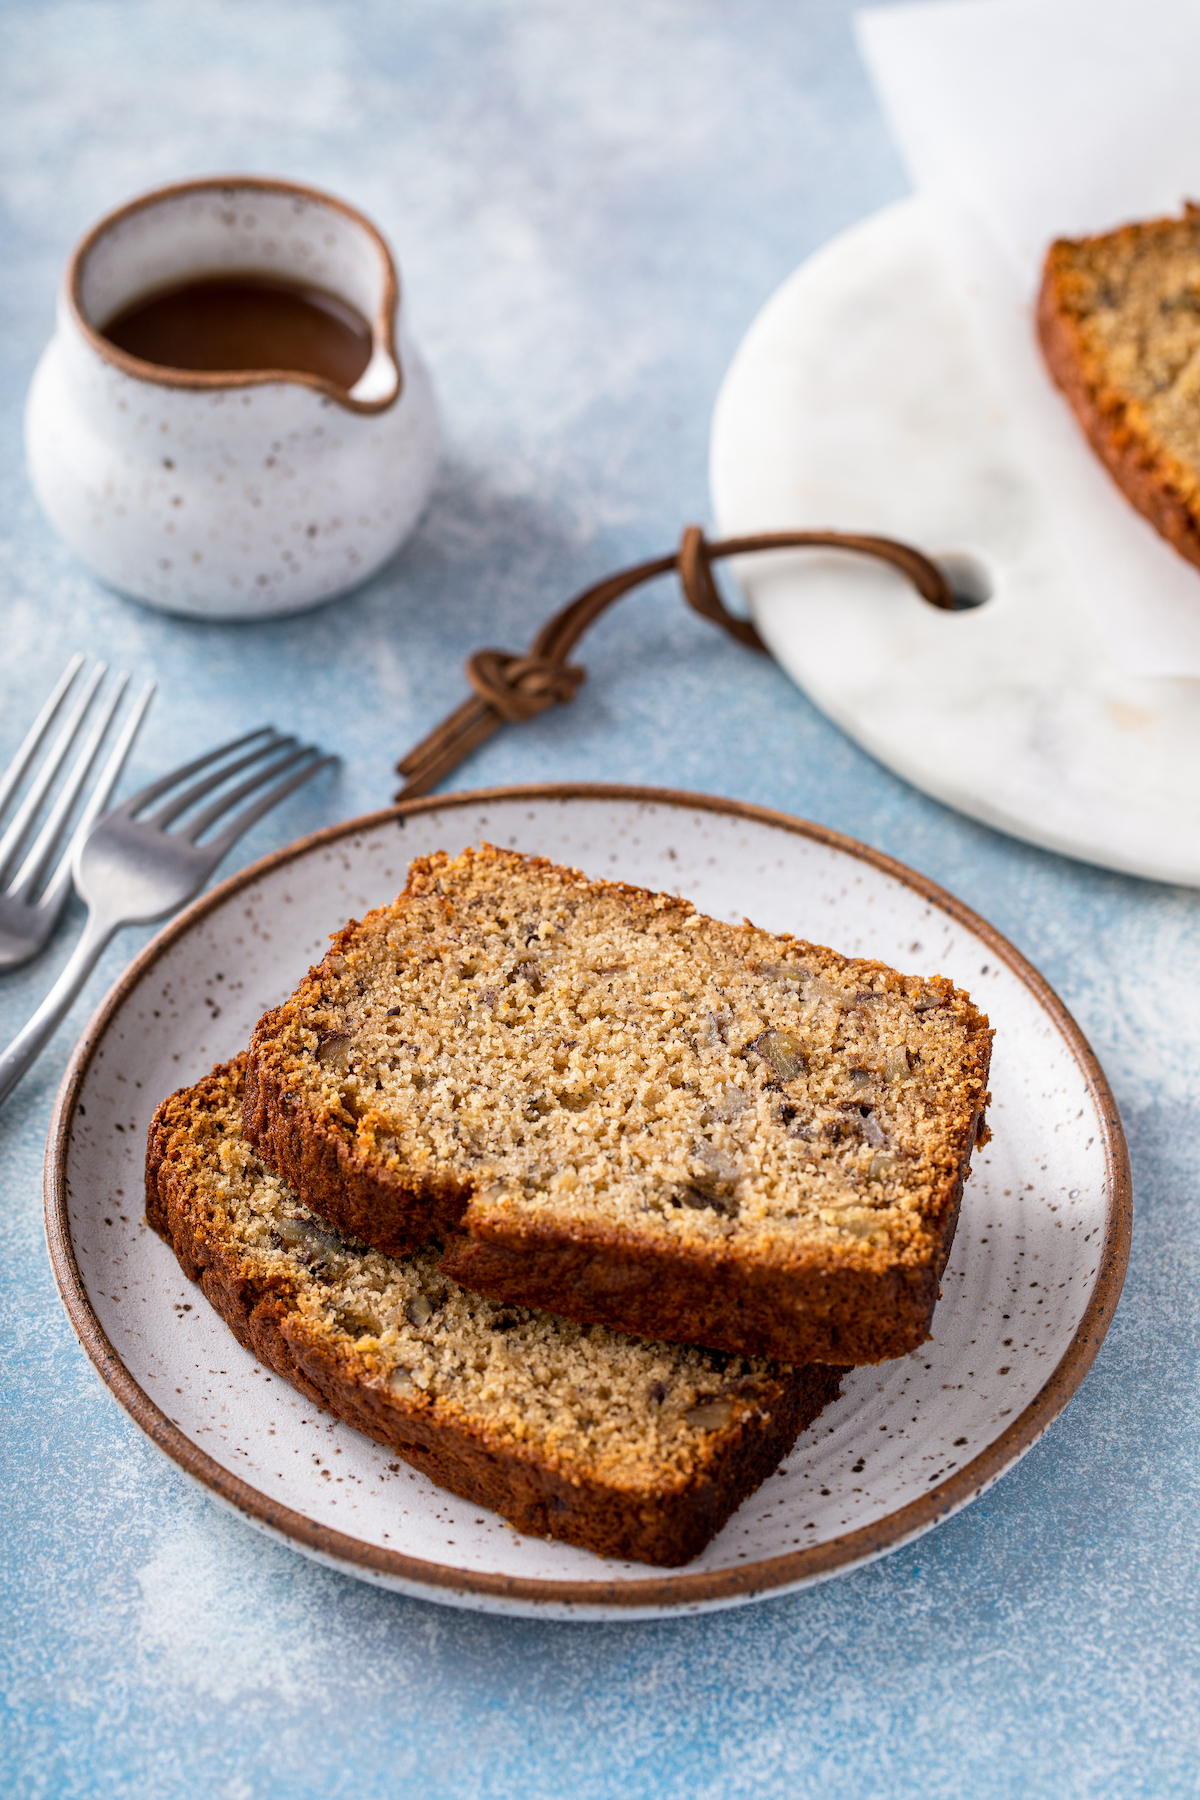 A serving of salted caramel banana bread on a plate.